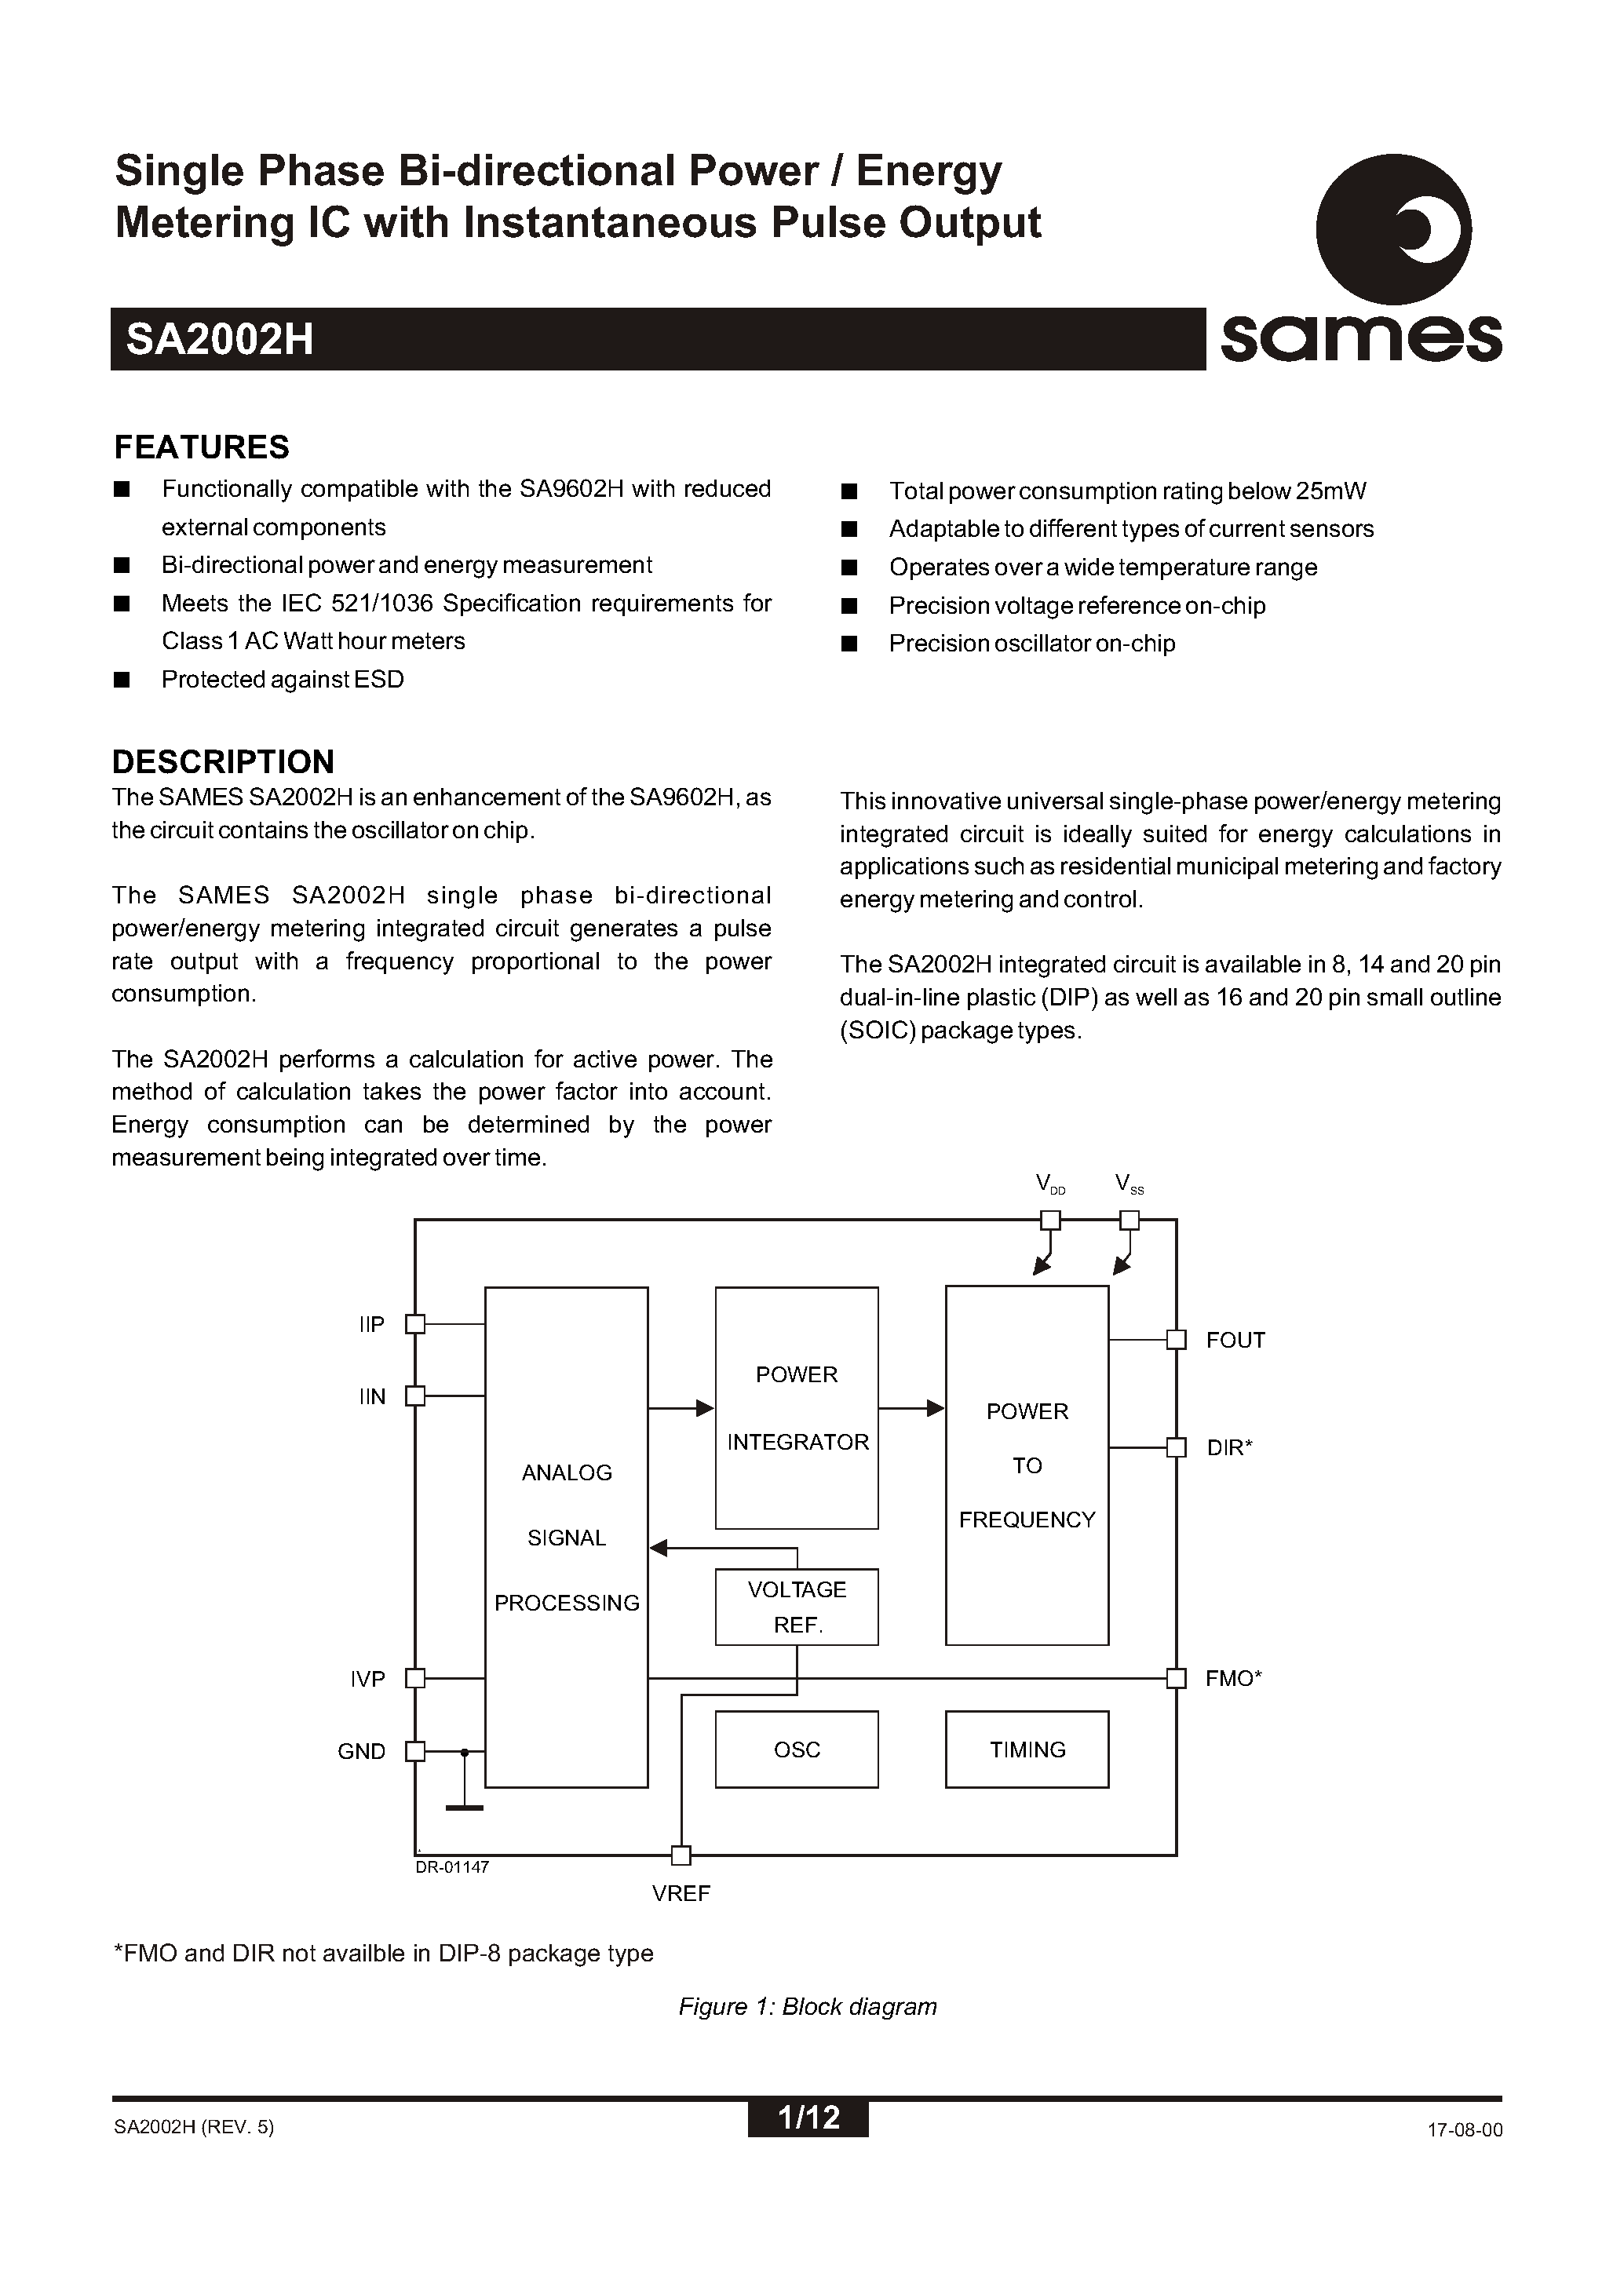 Даташит SA2002 - Single Phase Bi-directional Power / Energy Metering IC with Instantaneous Pulse Output страница 1